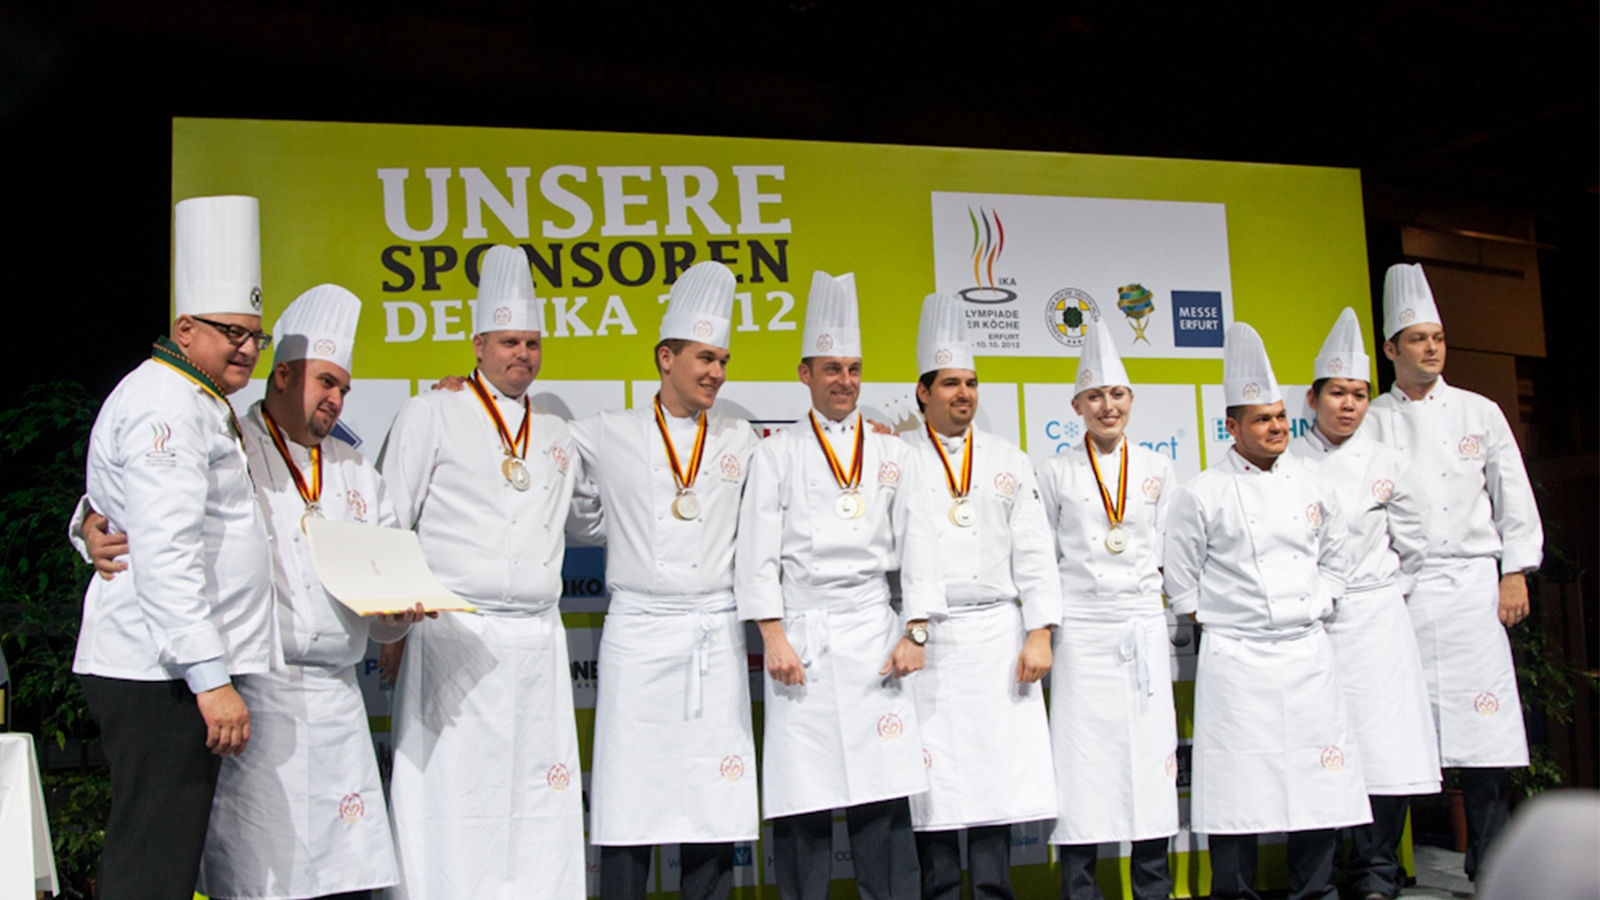 Gold Medal and Silver Medal Finalist - 2012 Culinary World Olympics - Culinary Team Canada